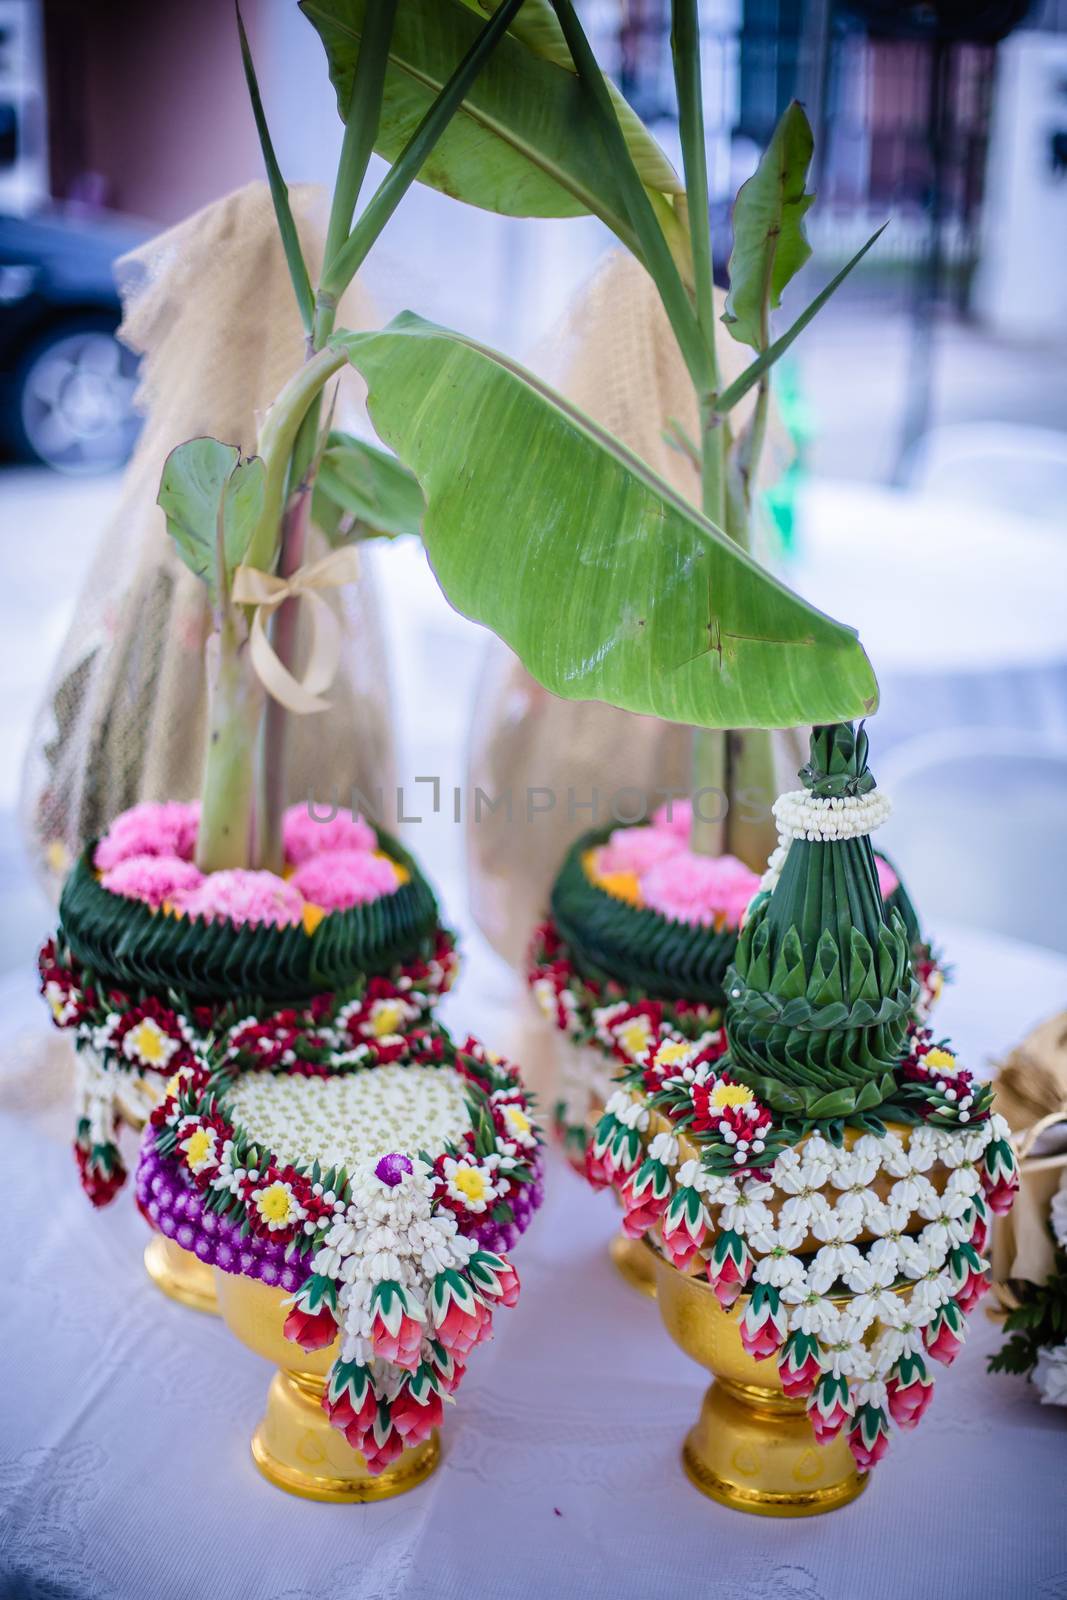 Flower tray with banana tree for Thai traditional wedding